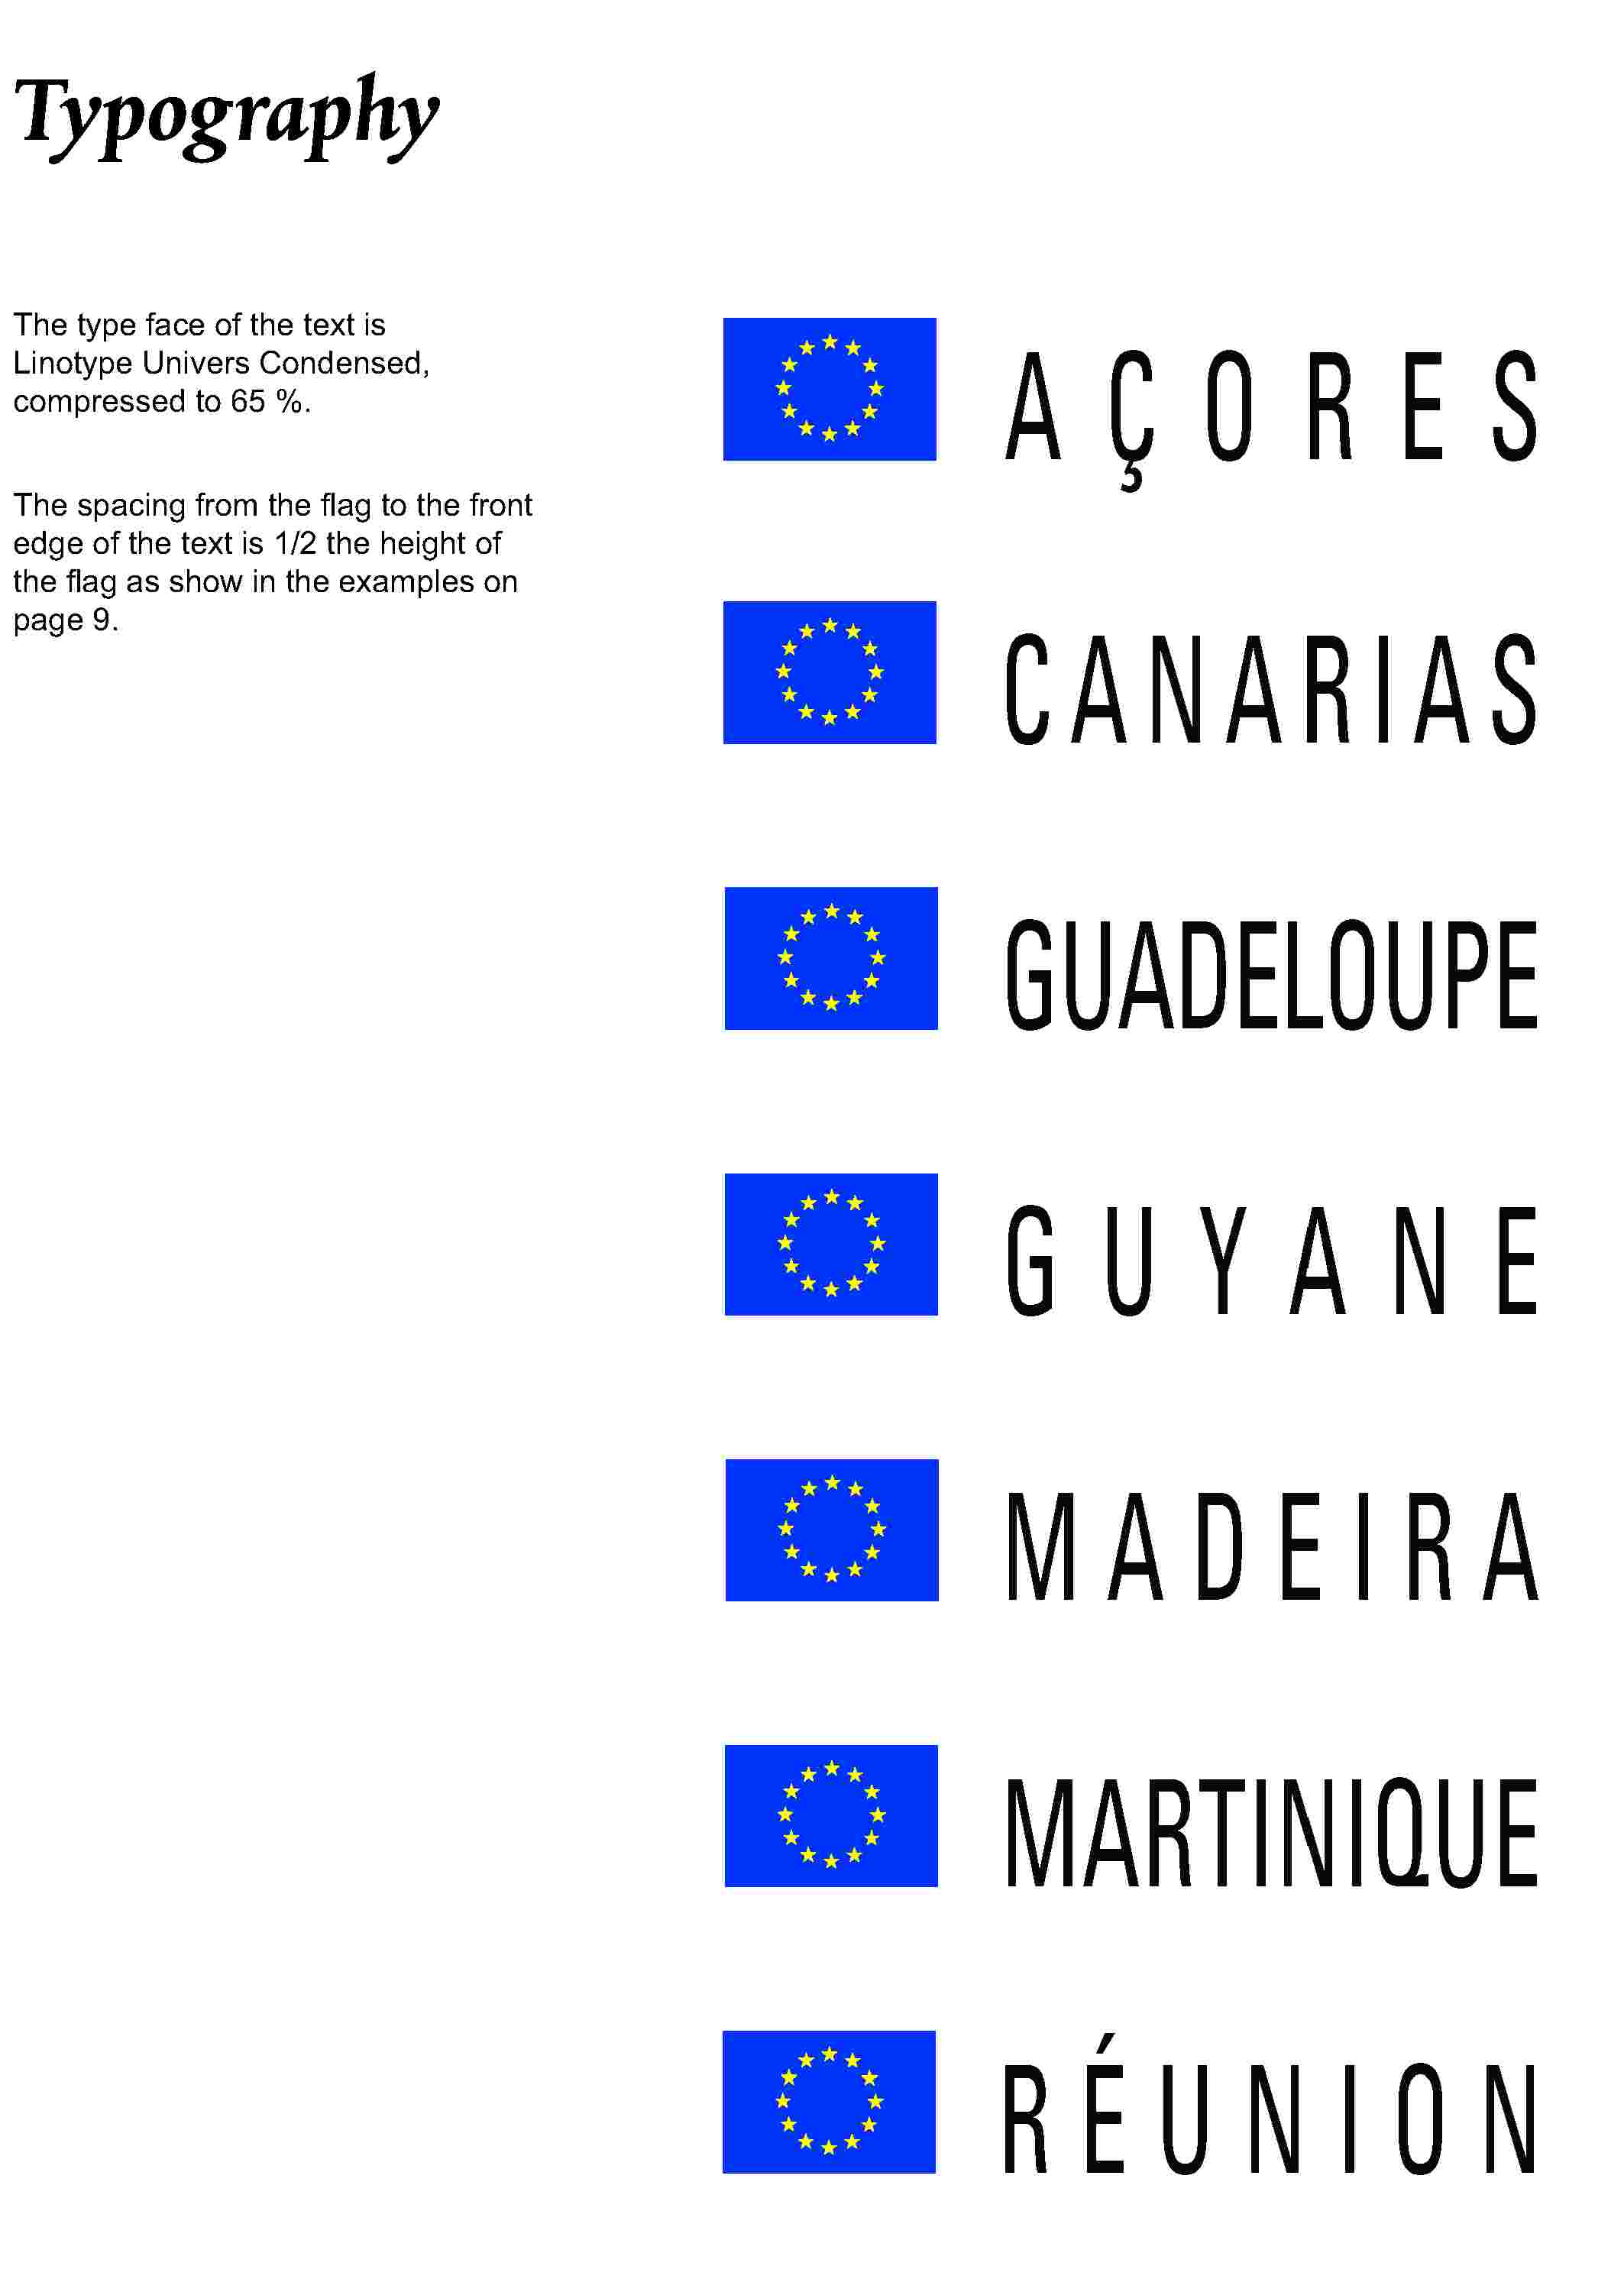 TypographyThe type face of the text is Linotype Univers Condensed, compressed to 65 %.The spacing from the flag to the front edge of the text is 1/2 the height of the flag as show in the examples on page 9.AÇORESCANARIASGUADELOUPEGUYANEMADEIRAMARTINIQUERÉUNION